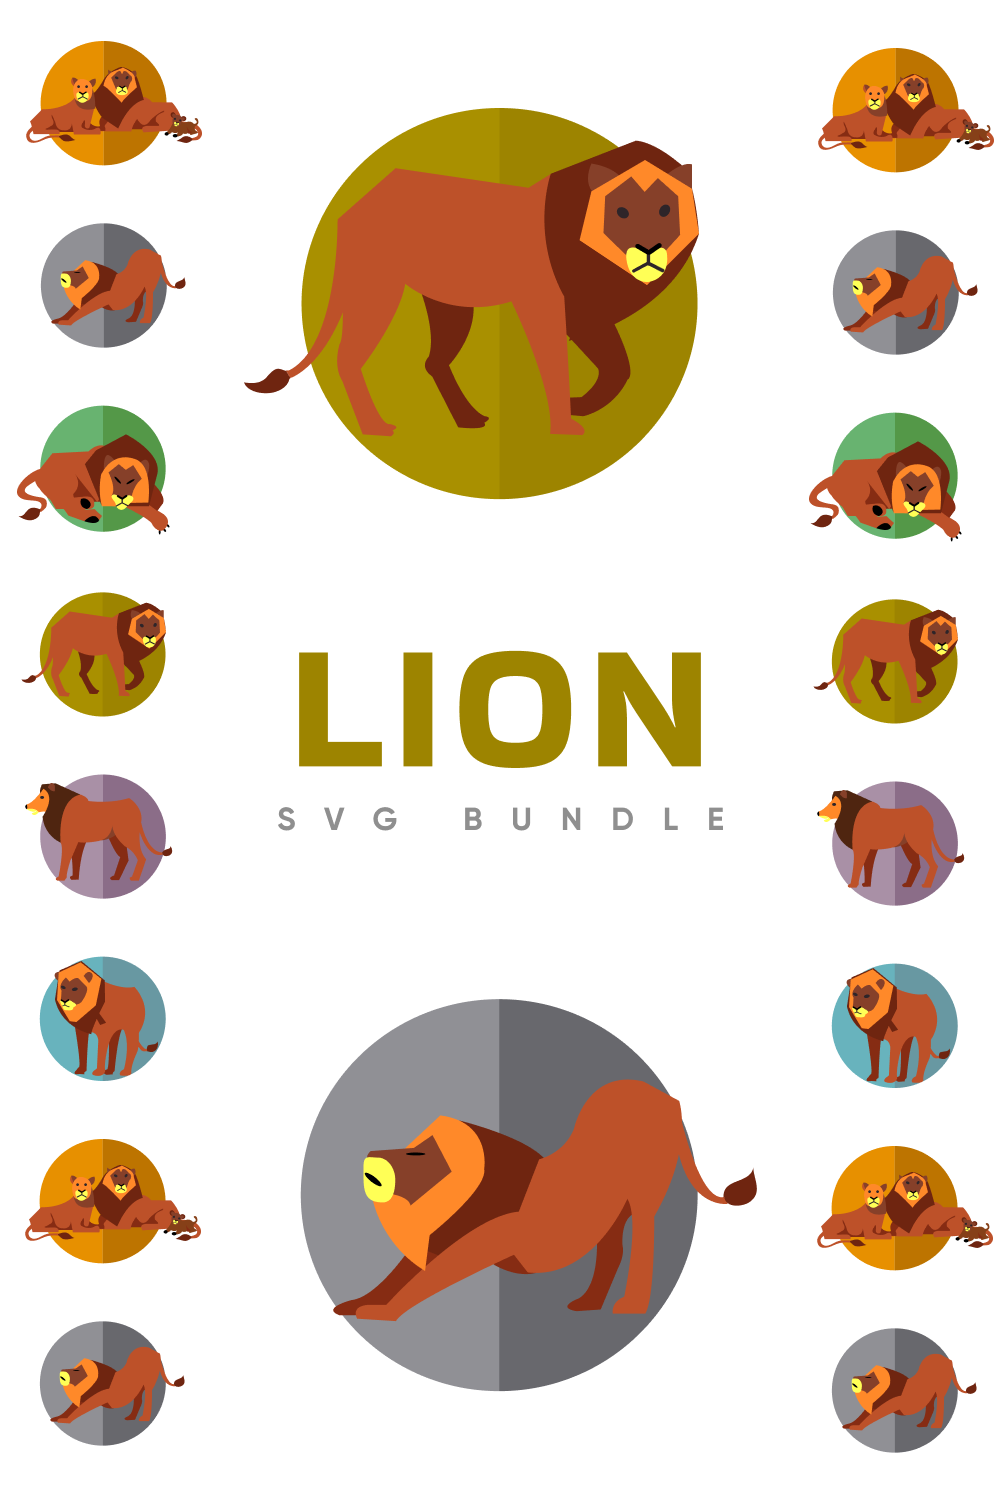 The lion svg bundle is shown in a circle.